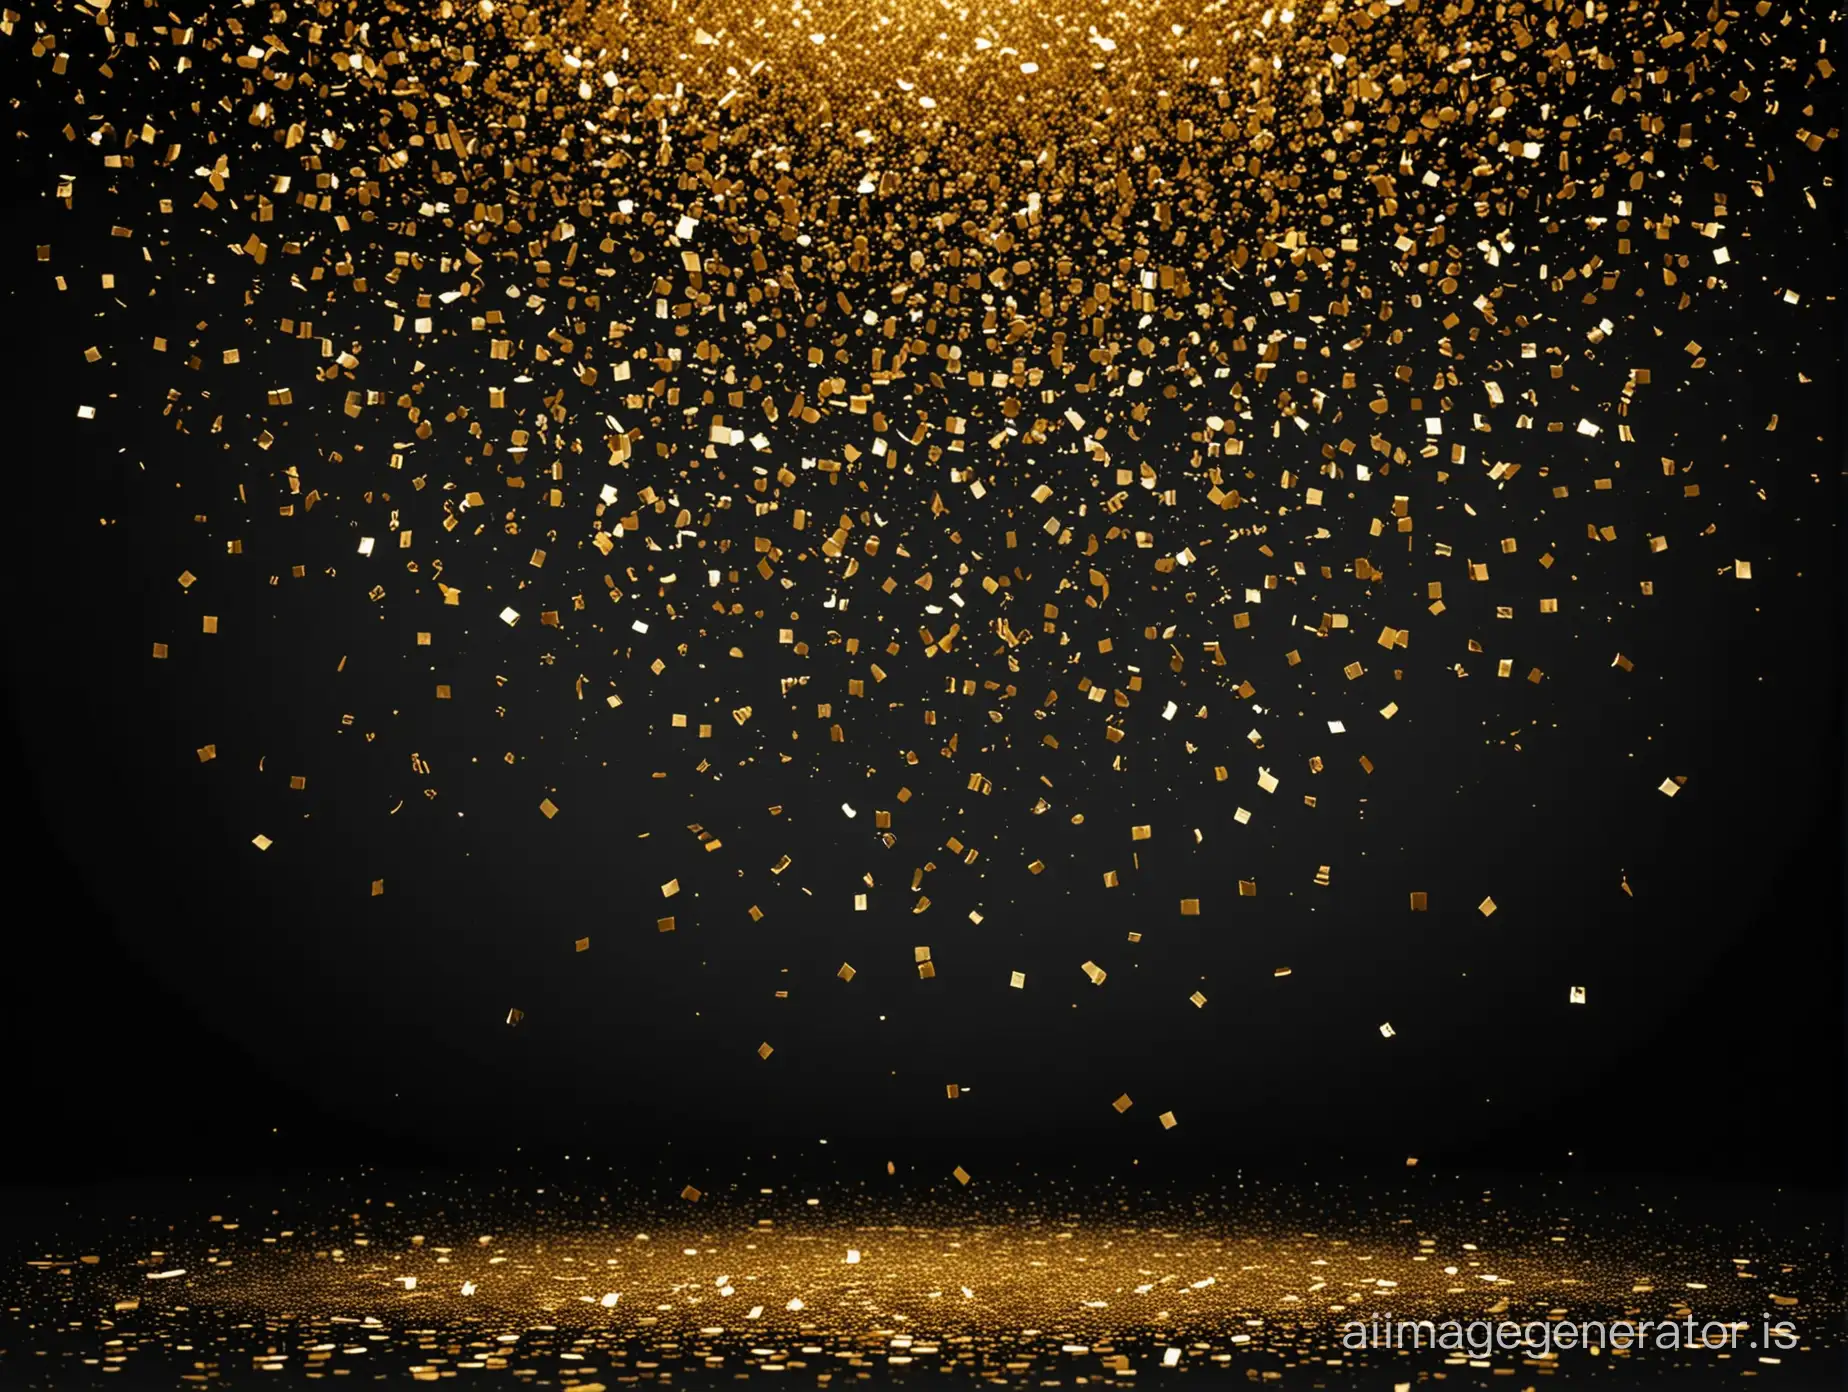 Golden-Confetti-Falling-with-Black-Background